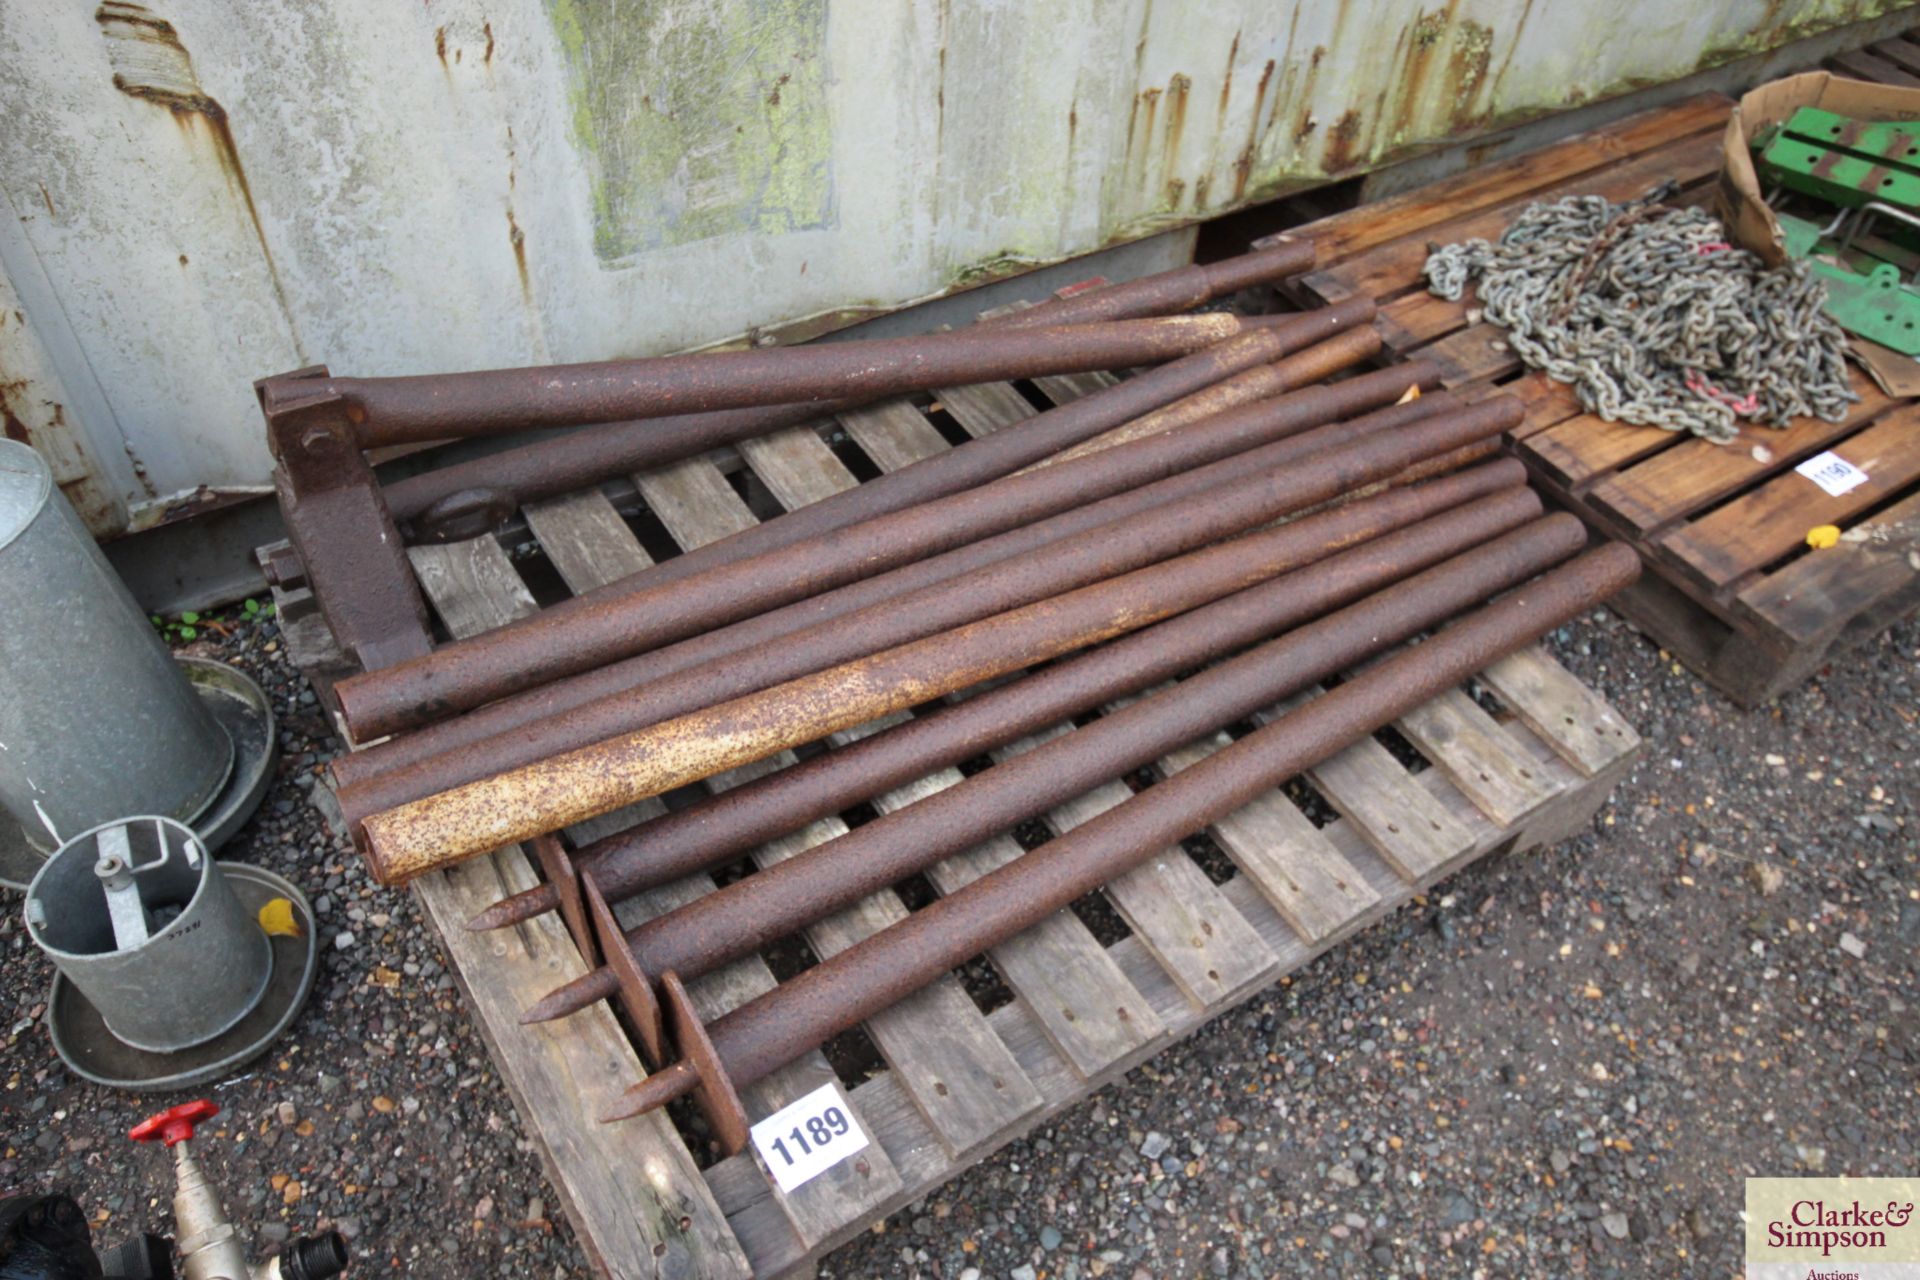 Ex-WD sheer legs. 4 sets of 3 to make lifting tripod 15ft high. Believed to be REME 1939-1945.